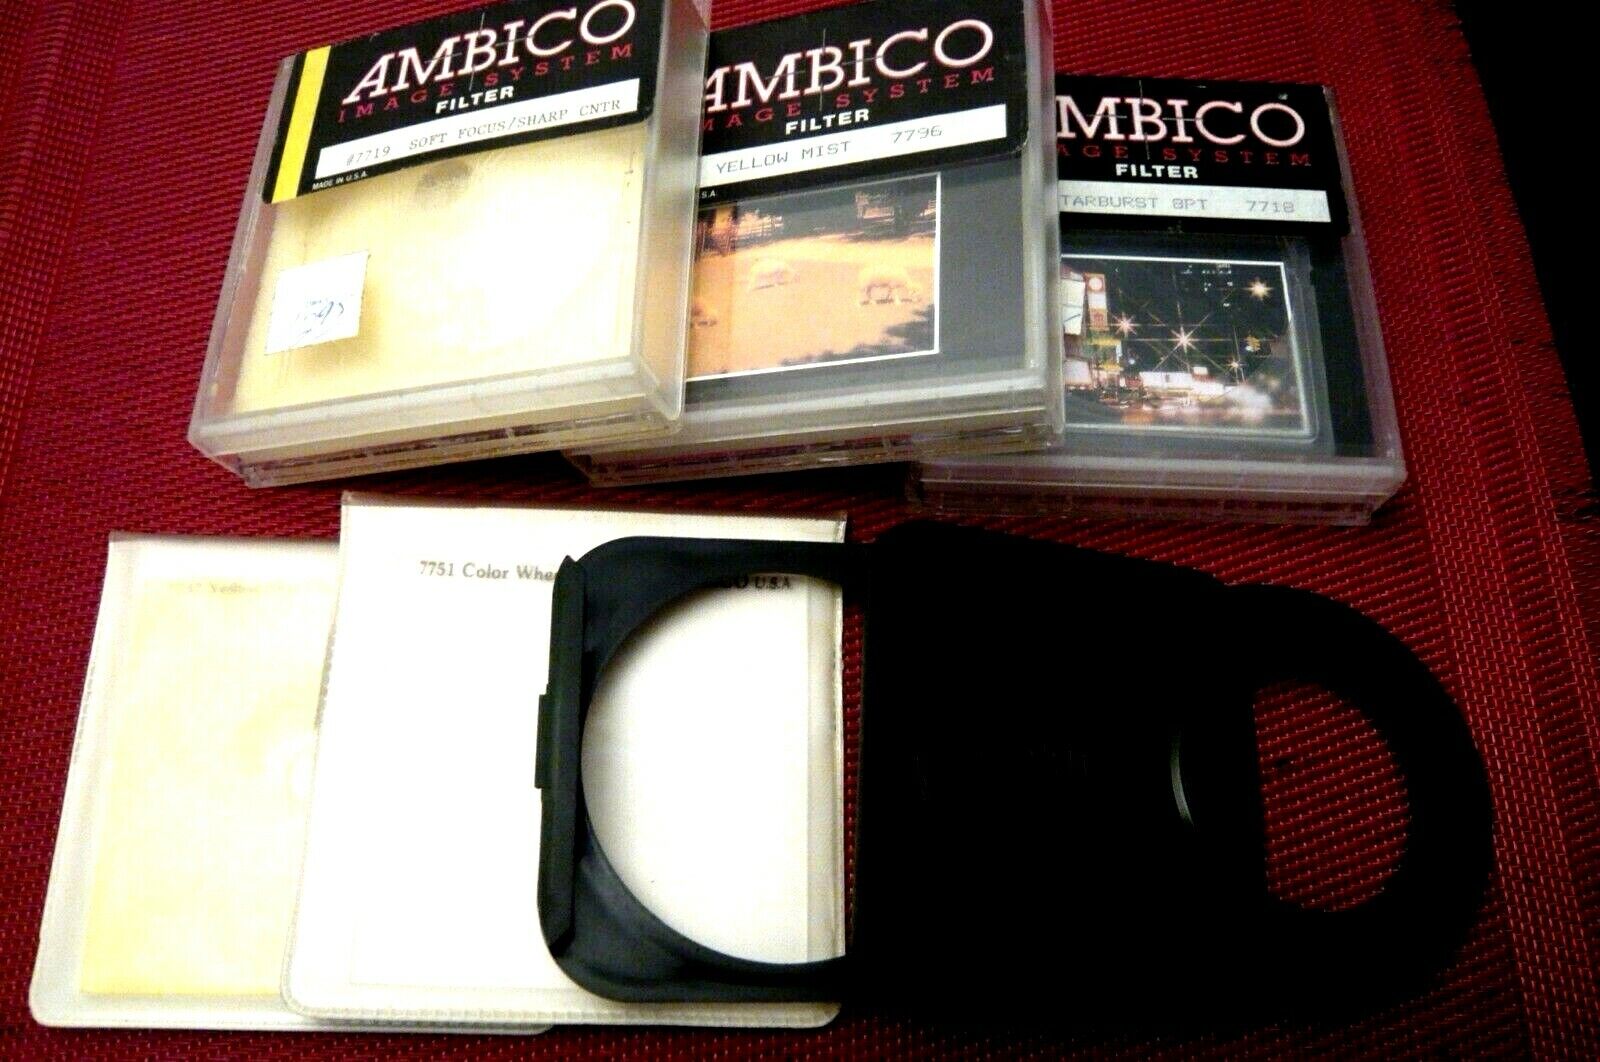  LOT  of  Ambico Square Filter set (B) 8 piece genuine. NEW ! ambico